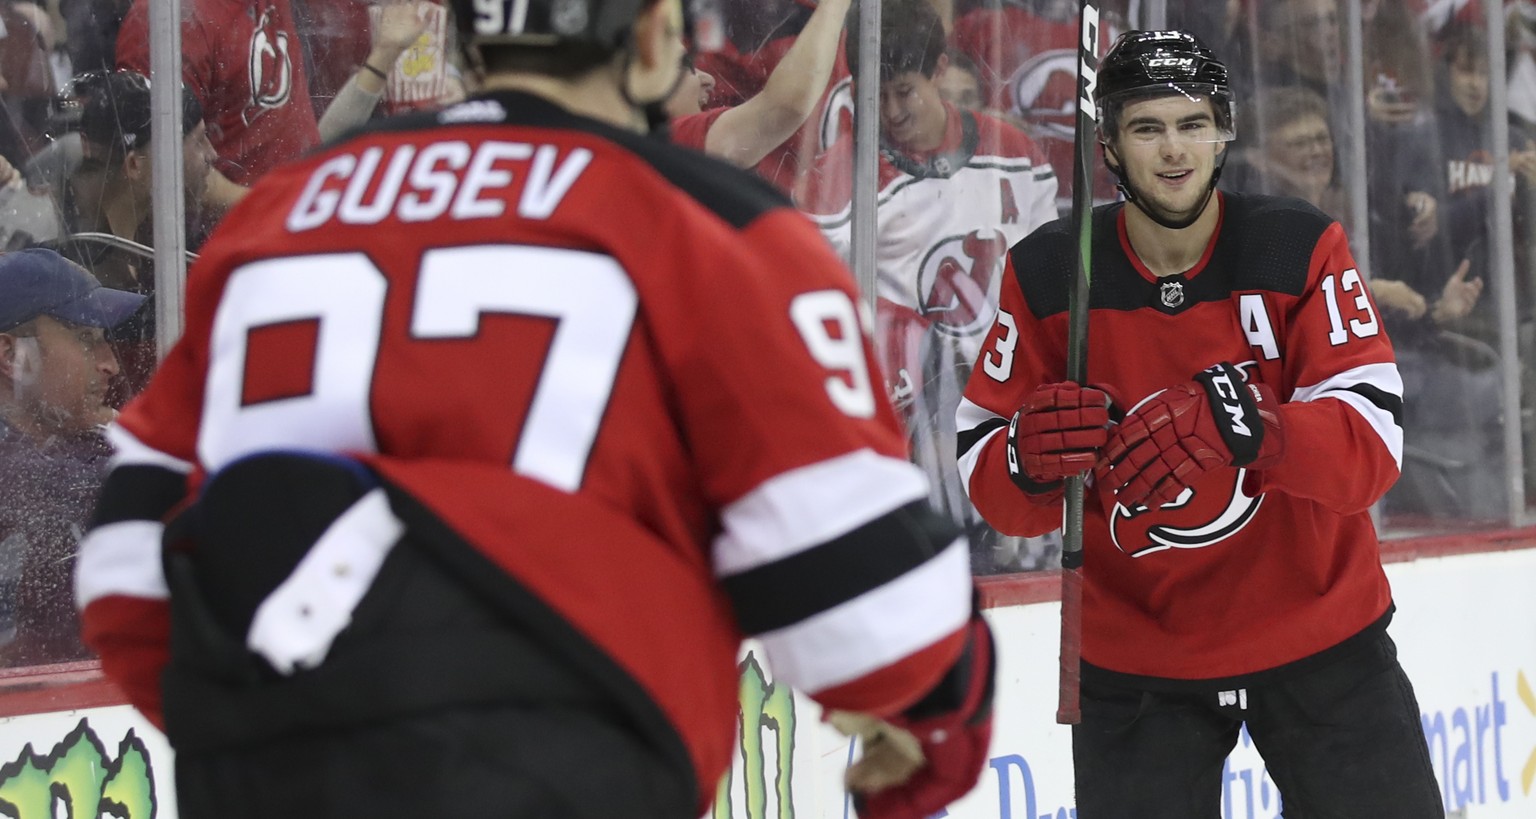 New Jersey Devils left wing Nikita Gusev (97) celebrates after scoring a goal with center Nico Hischier (13) during the second period of a preseason NHL hockey game, Saturday, Sept. 21, 2019, in Newar ...